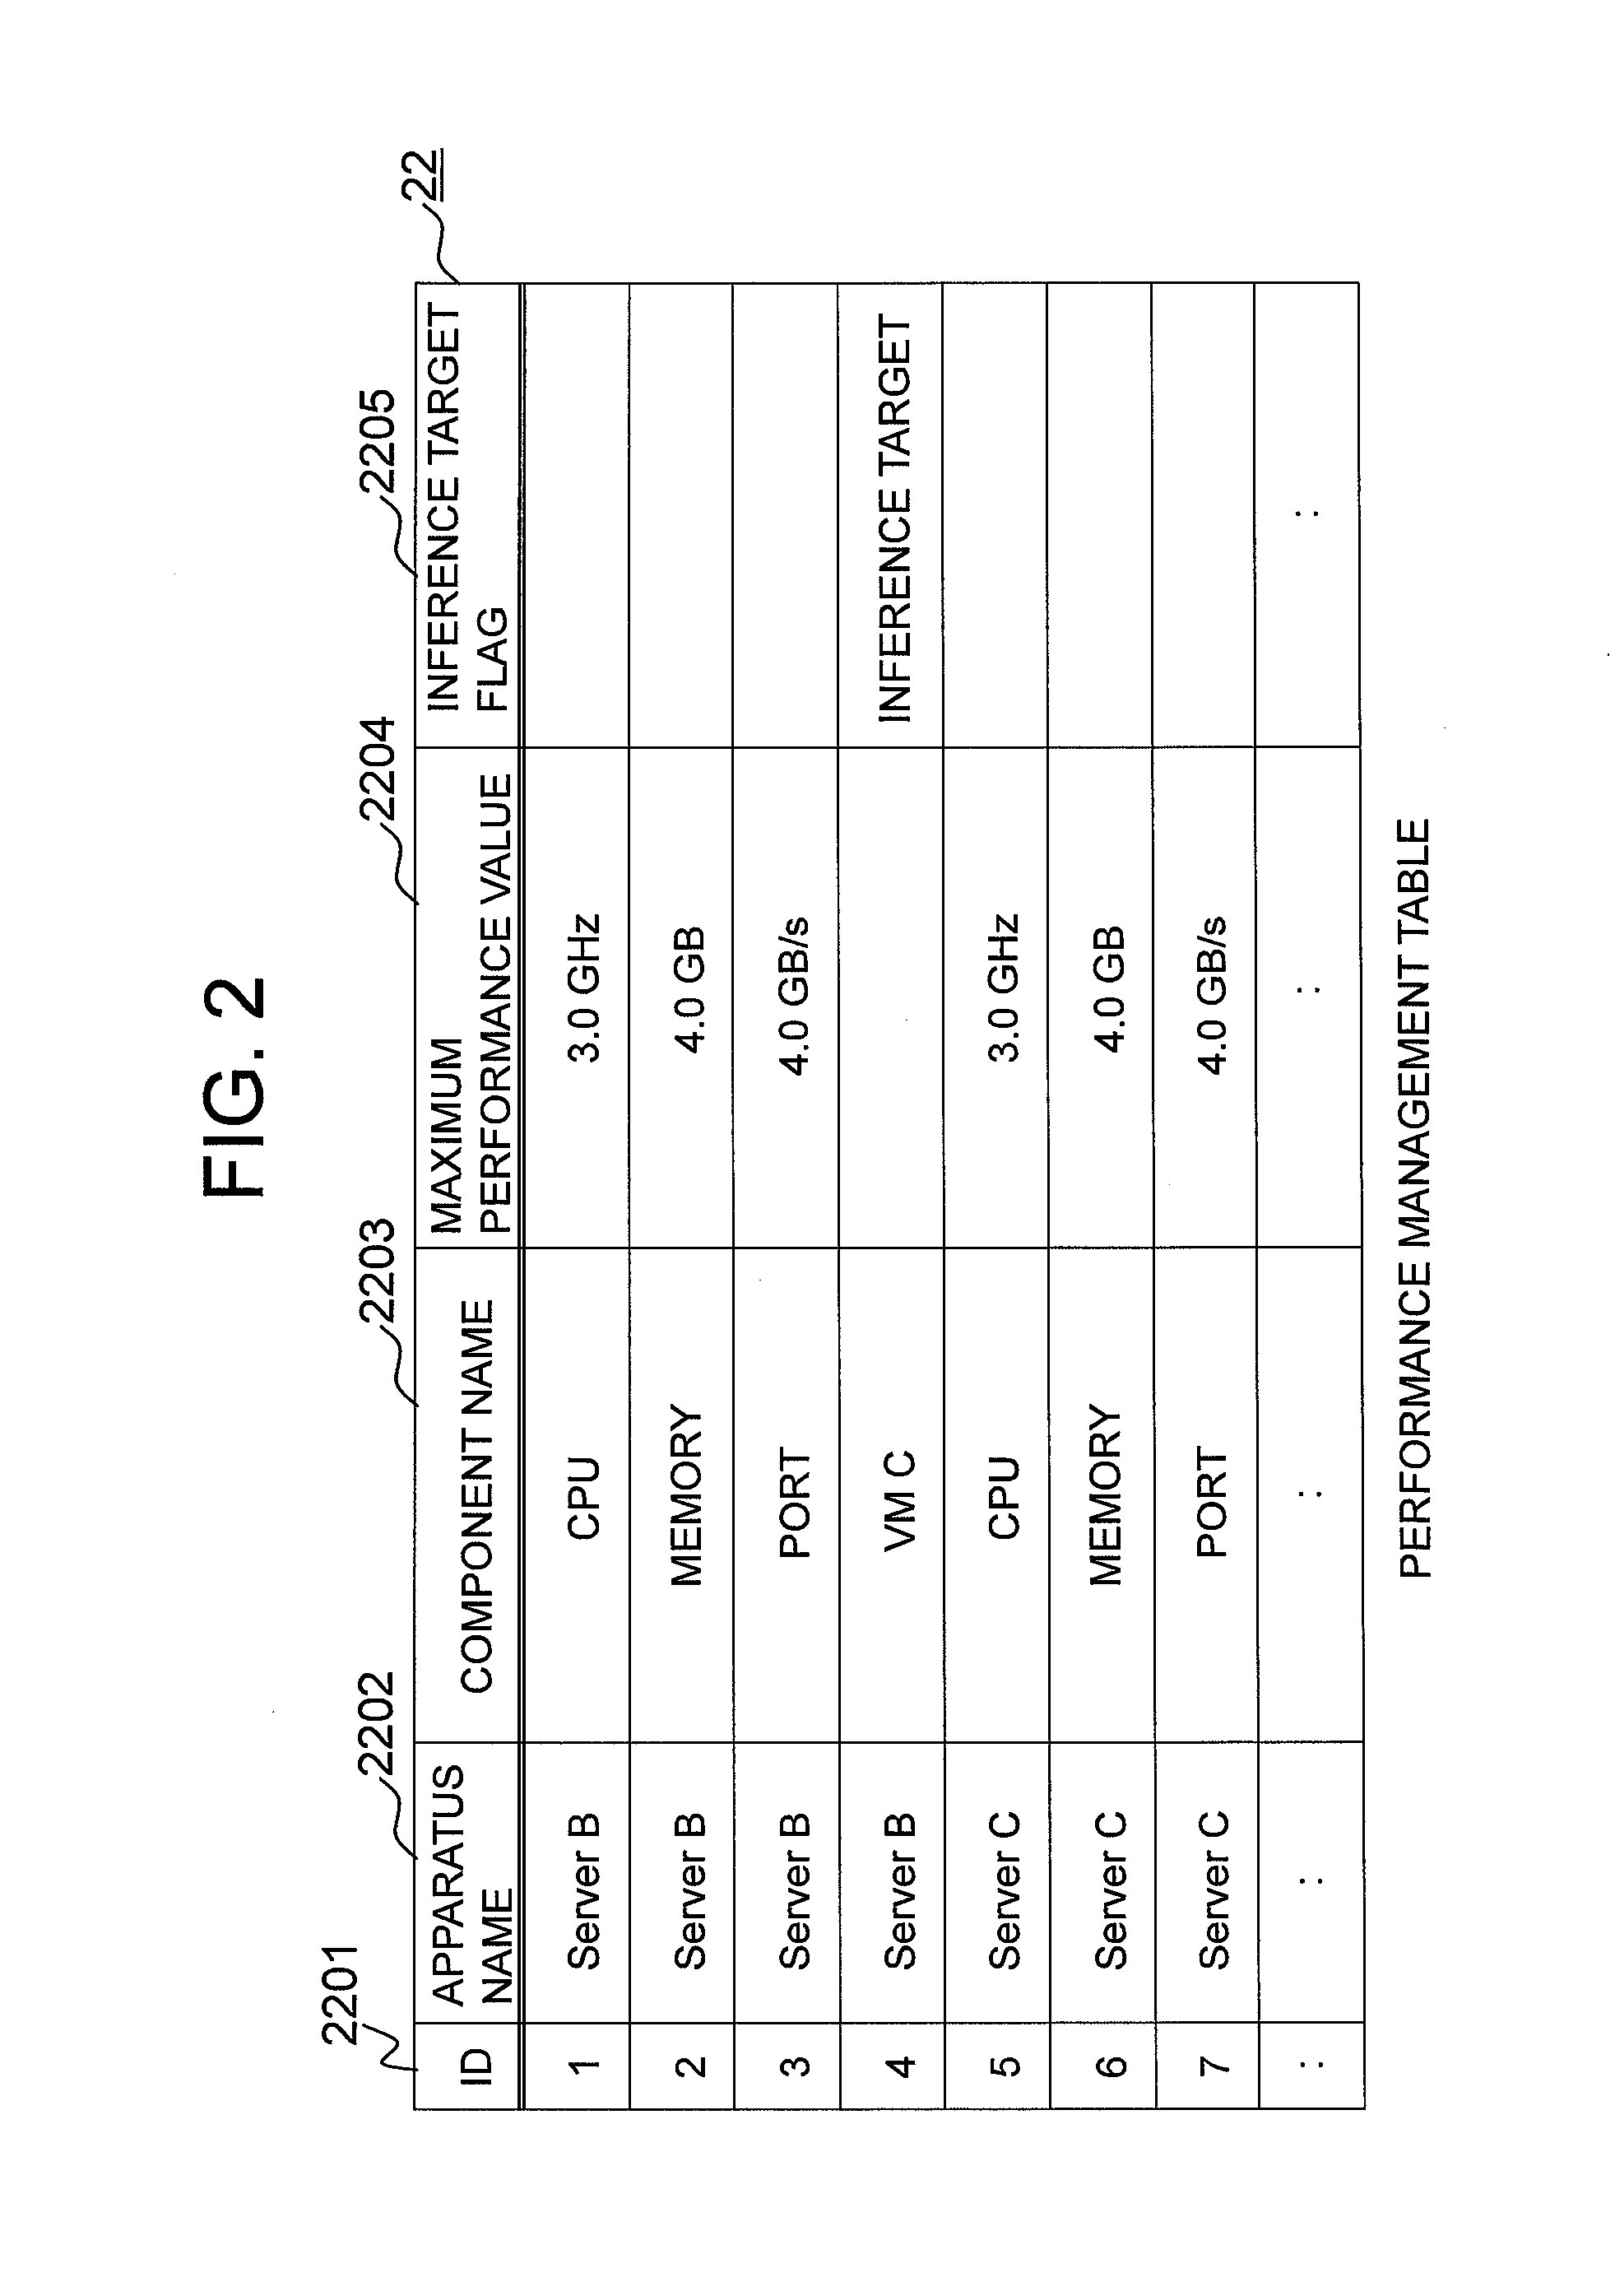 Method for inferring extent of impact of configuration change event on system failure